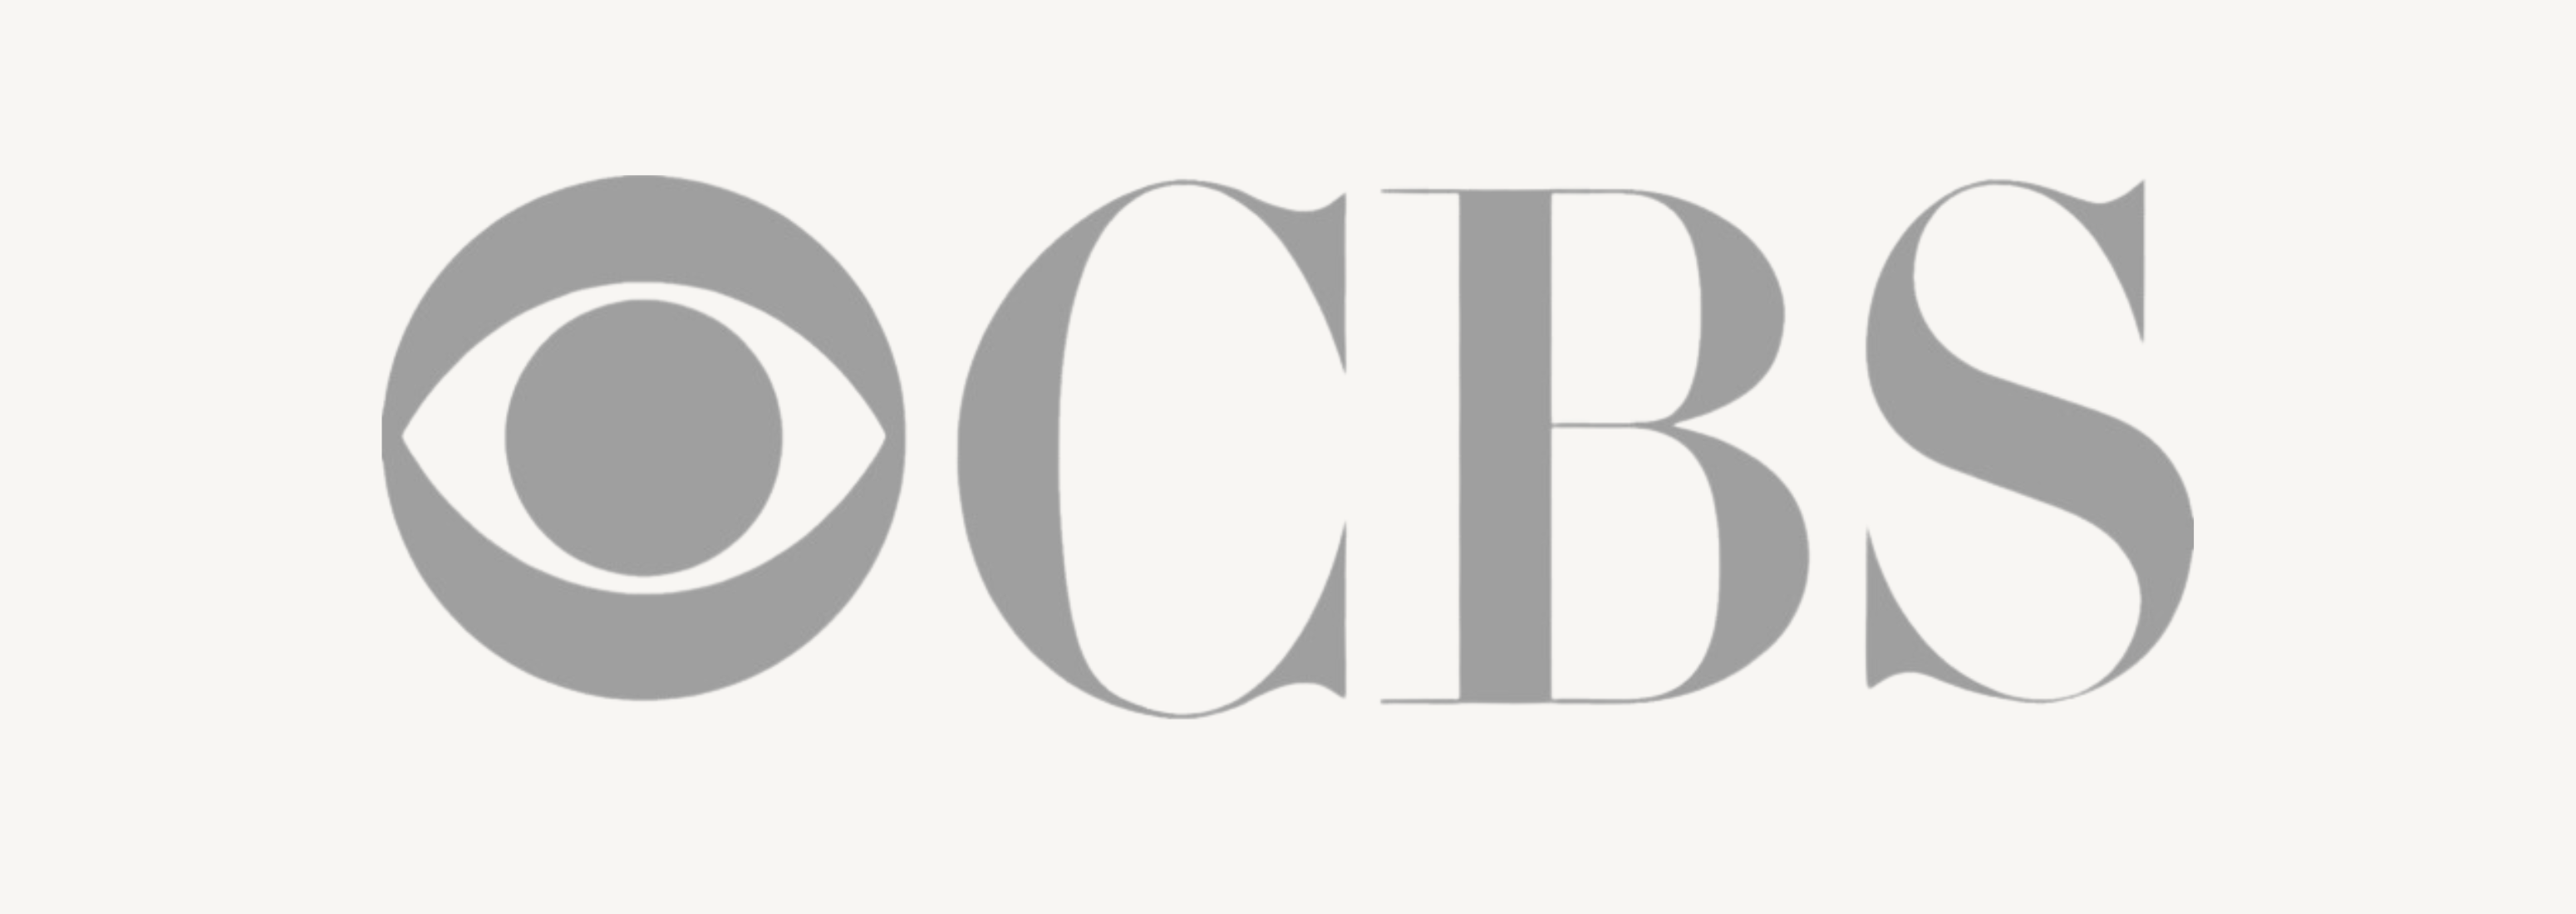 CBS logo to showcase '50 Shades of Greed' featured on CBS news as a dried flower shop where people can buy dry flowers